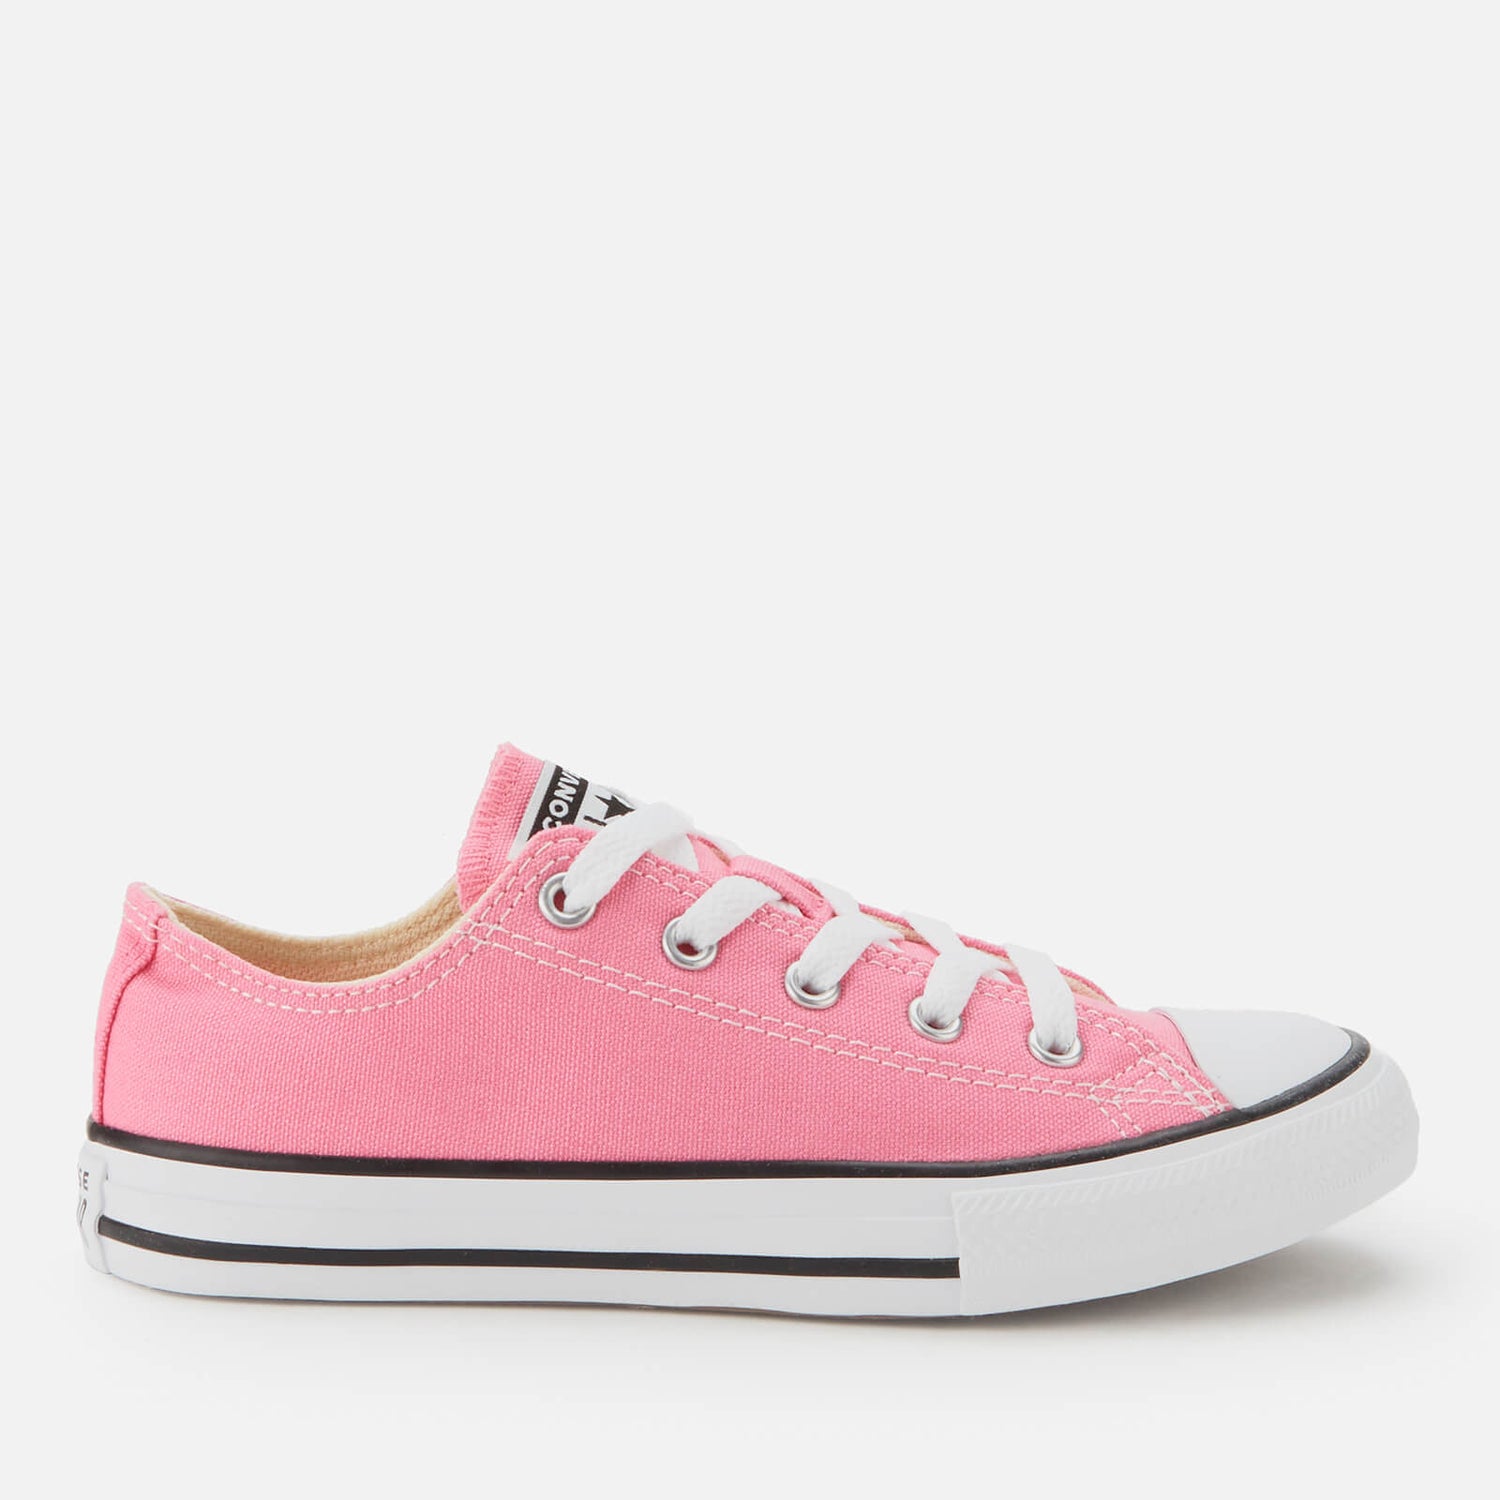 Converse Kids' Chuck Taylor All Star Ox Trainers - Pink - UK 10 Kids